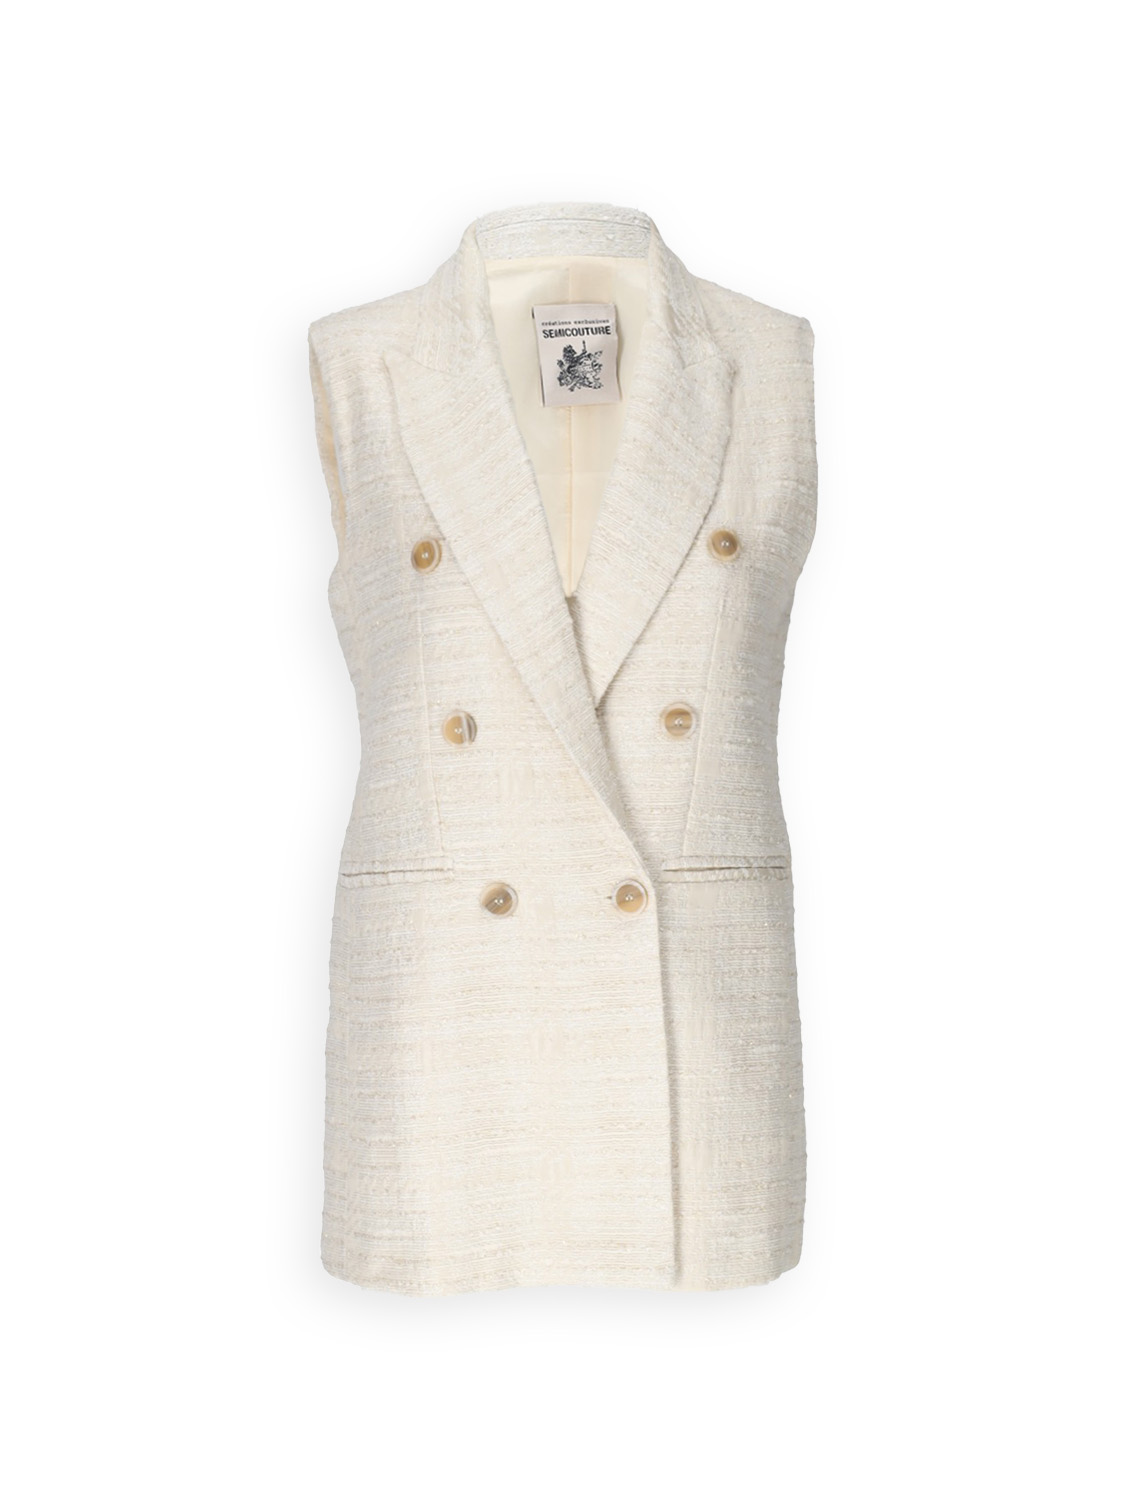 Readymade tweed waistcoat with lurex details 